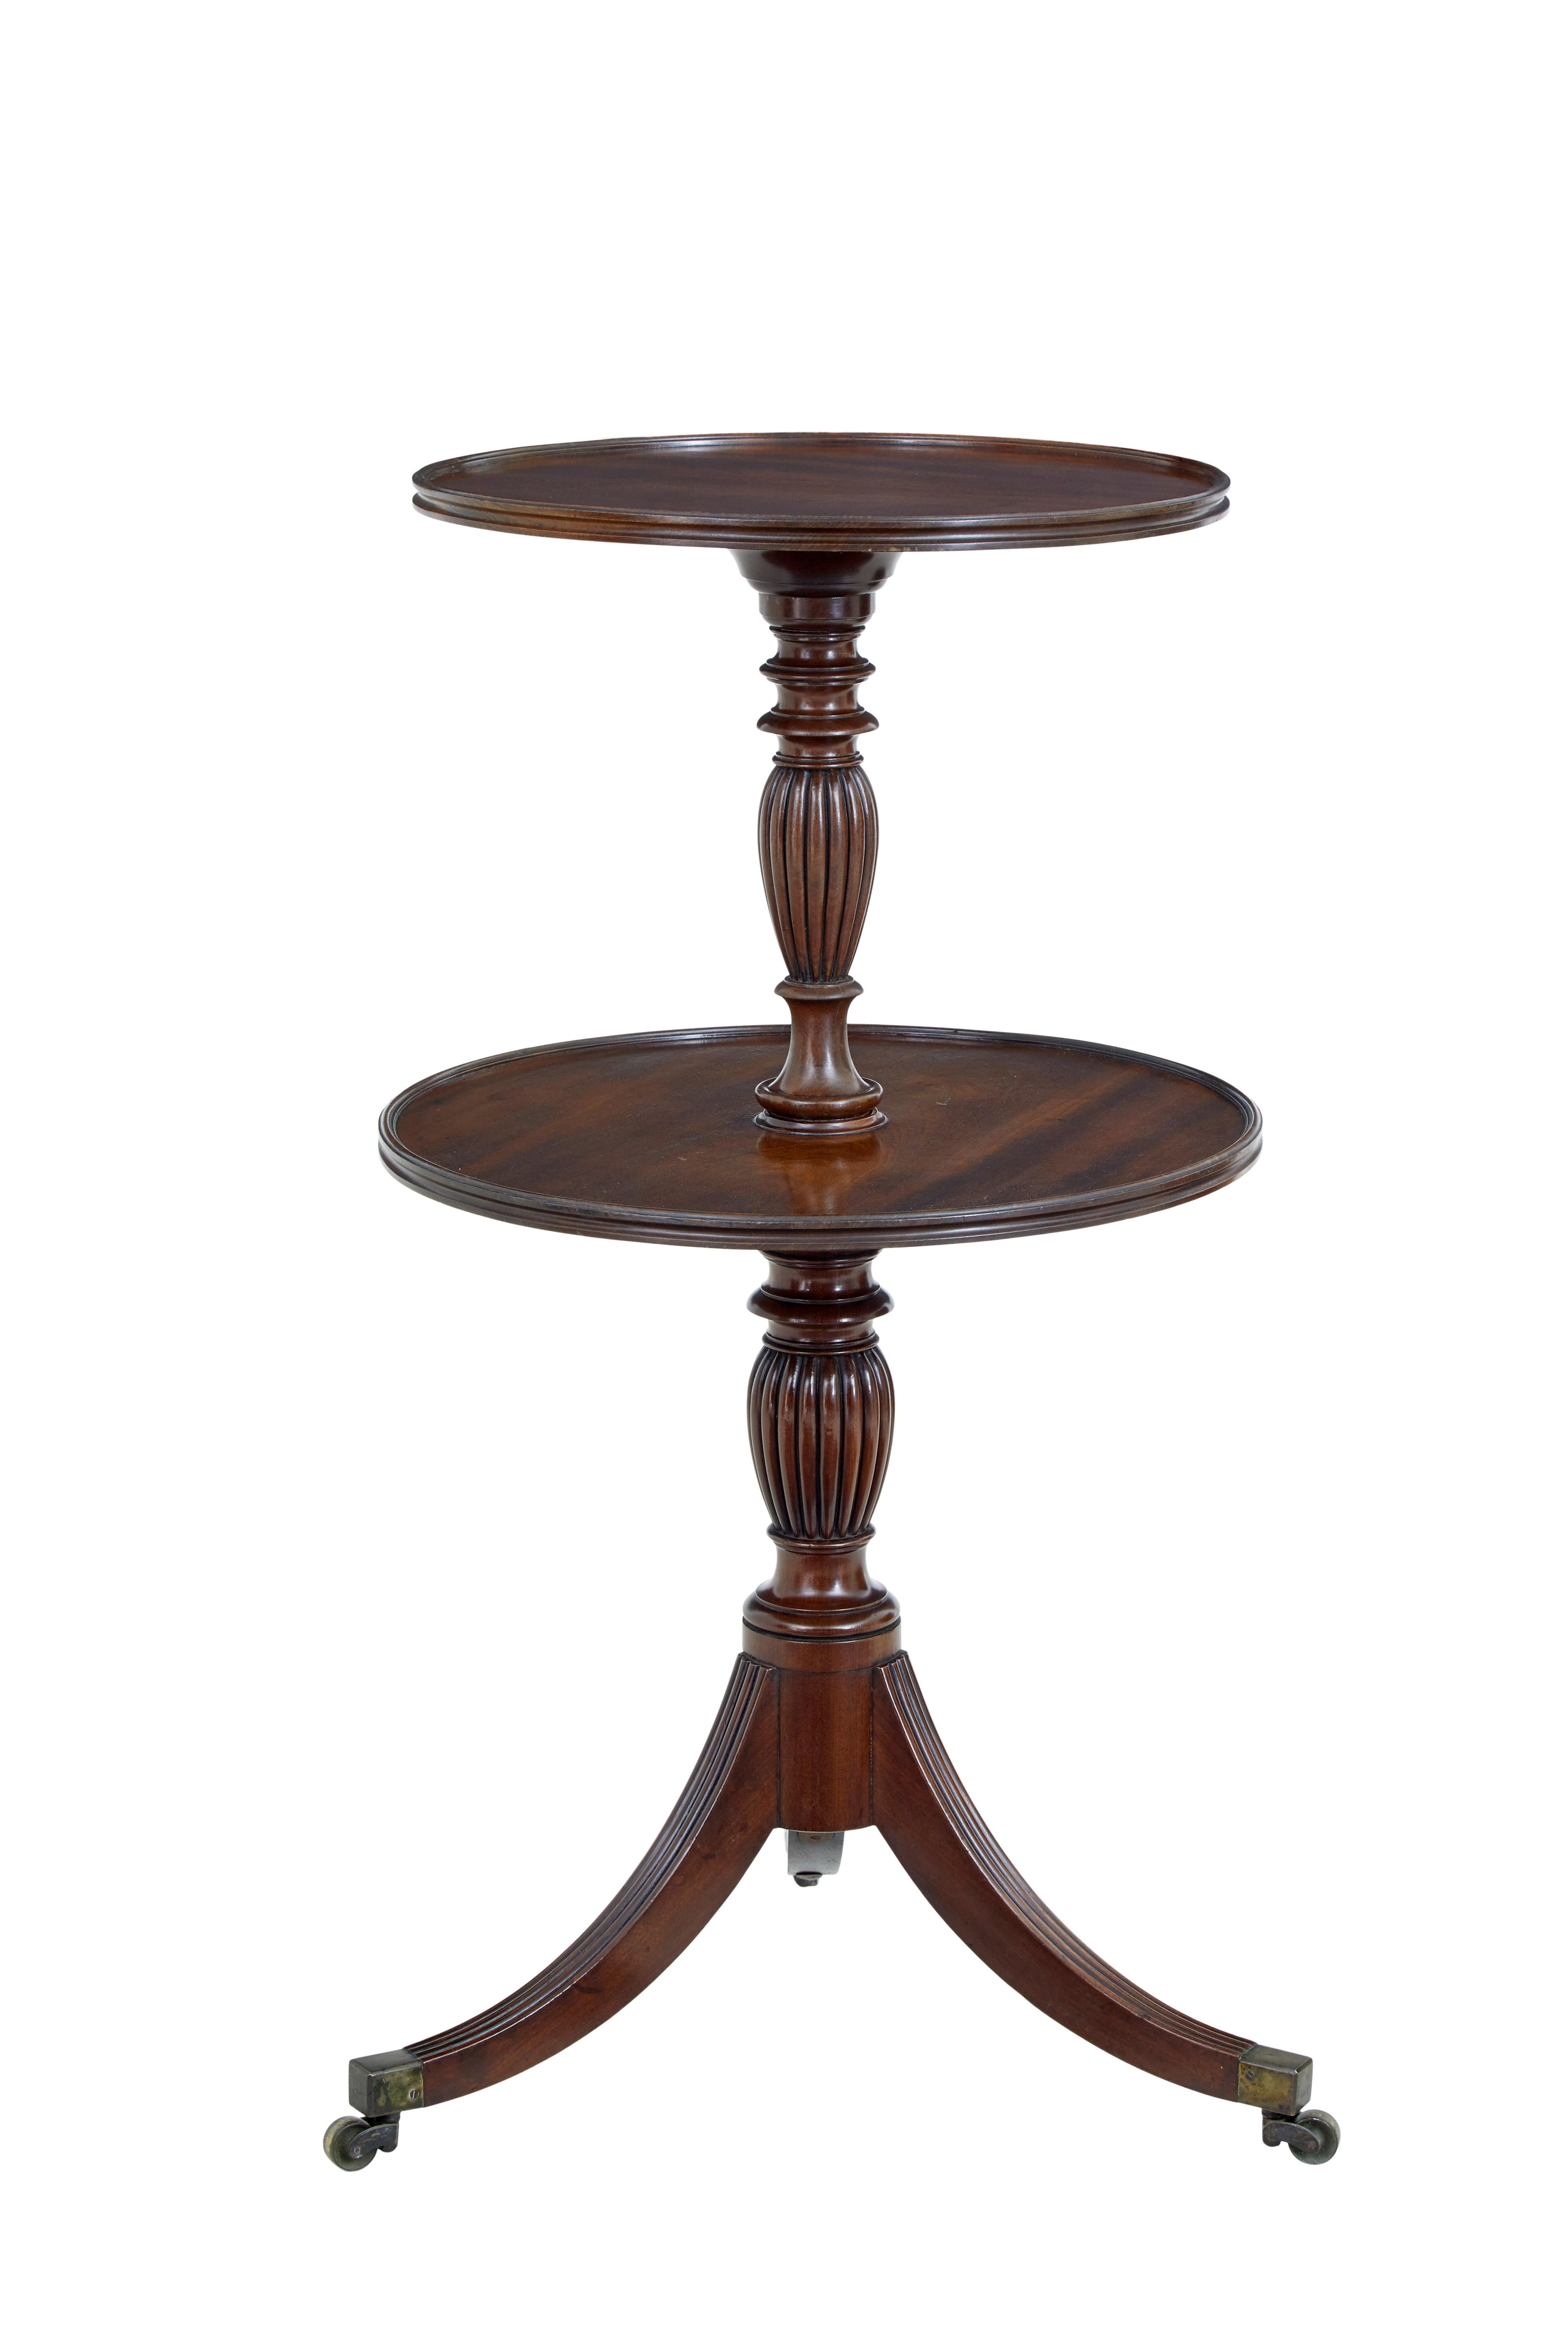 19th Century 19th century William IV mahogany 2 tier circular serving table For Sale